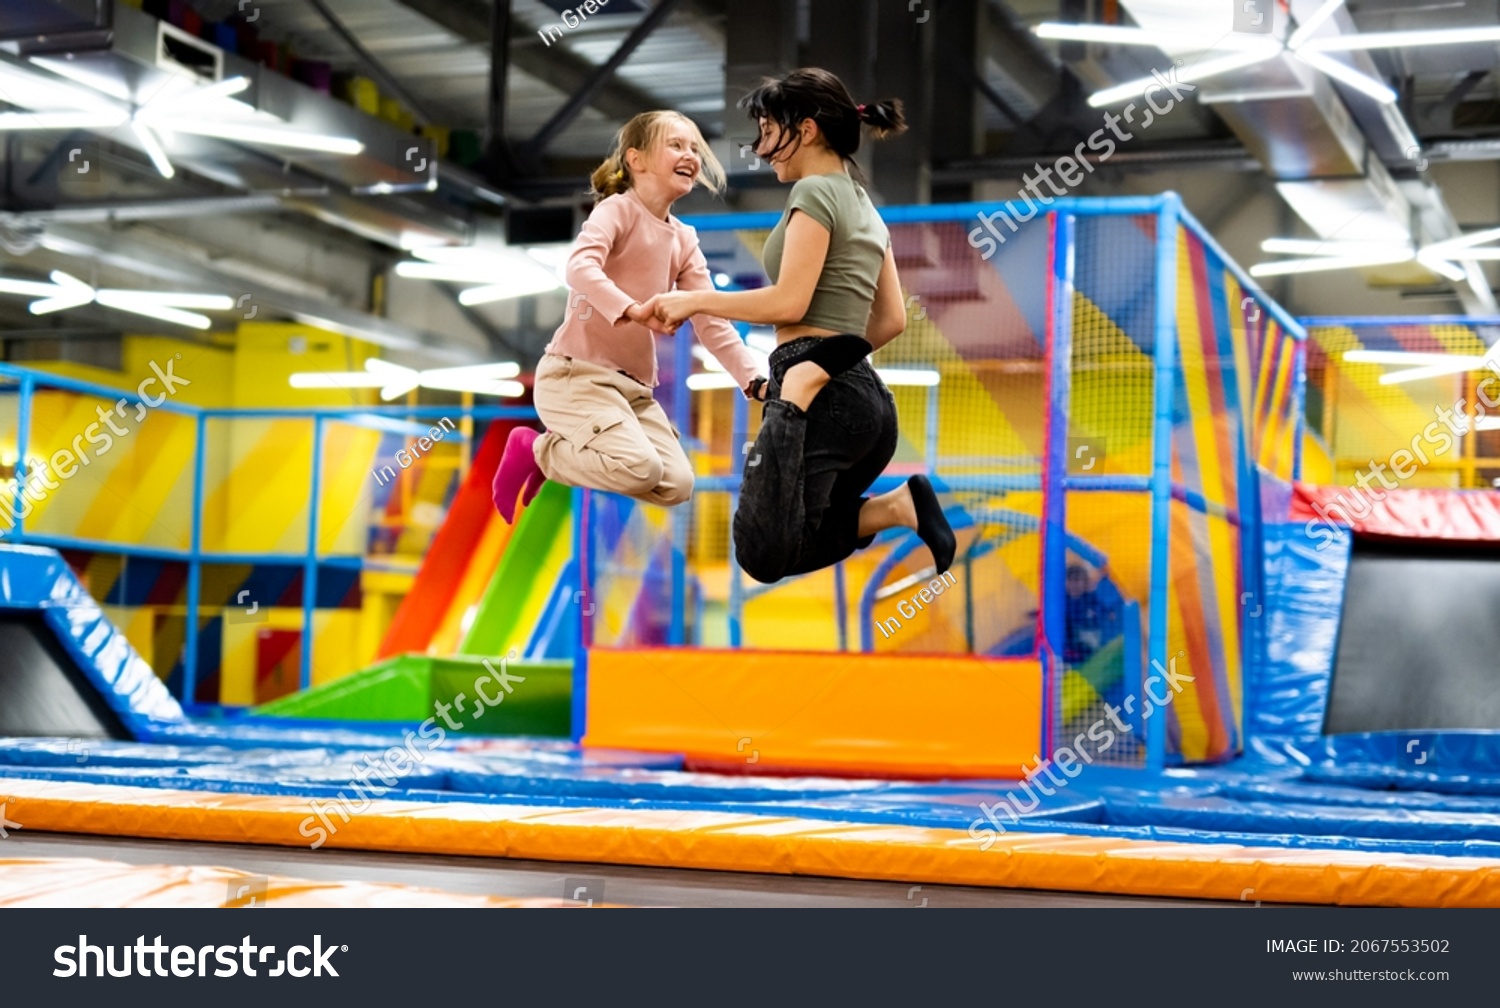 Pretty girls jumping together on colorful trampoline at playground park. Two sisters having fun during active entertaiments indoor #2067553502